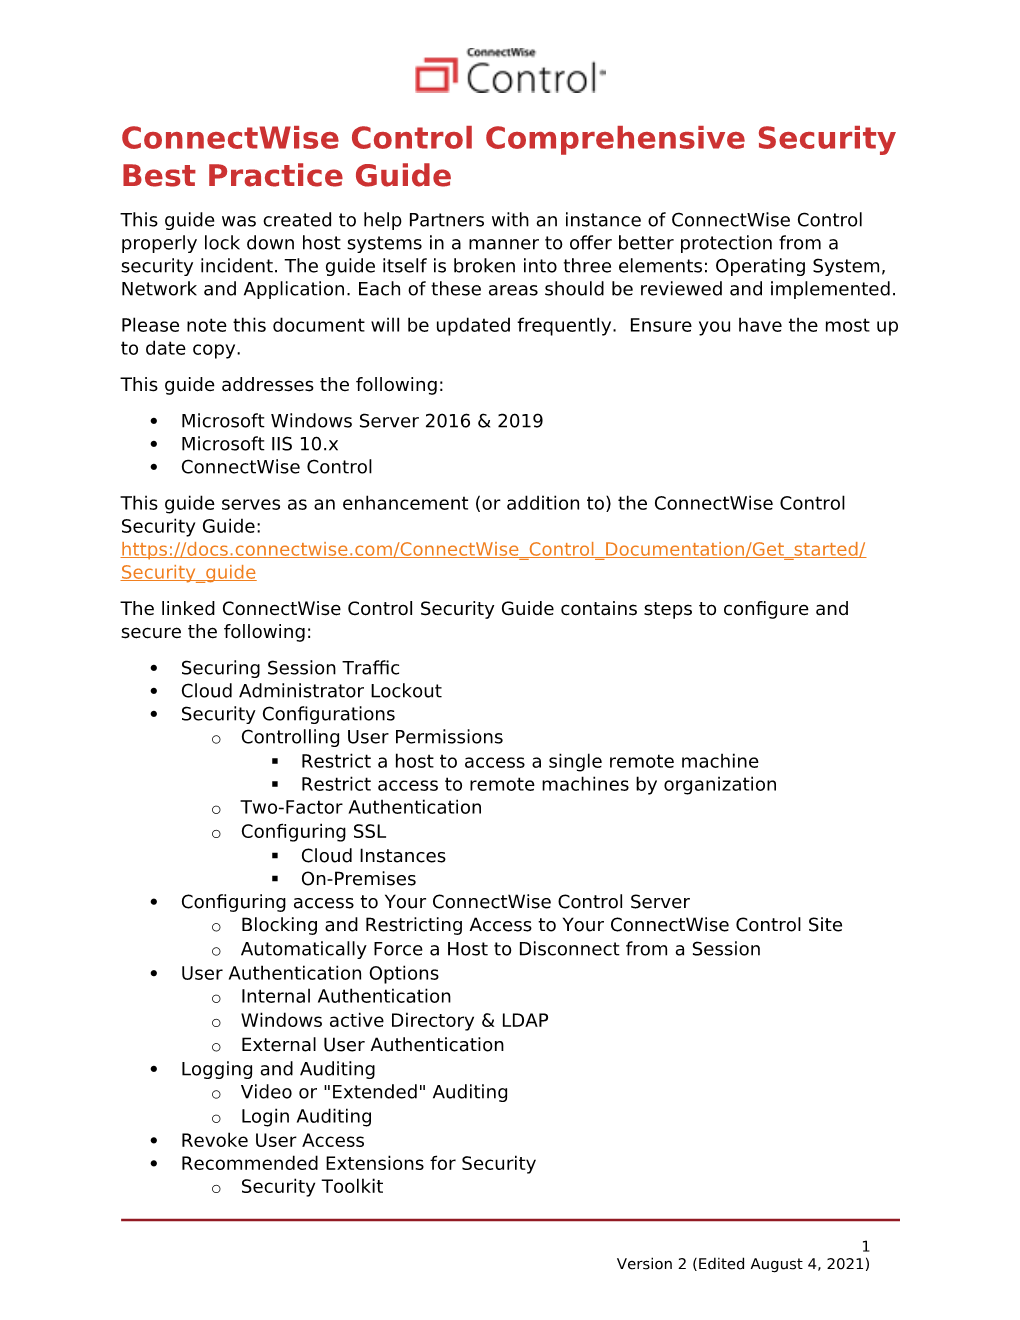 Connectwise Control Comprehensive Security Best Practice Guide